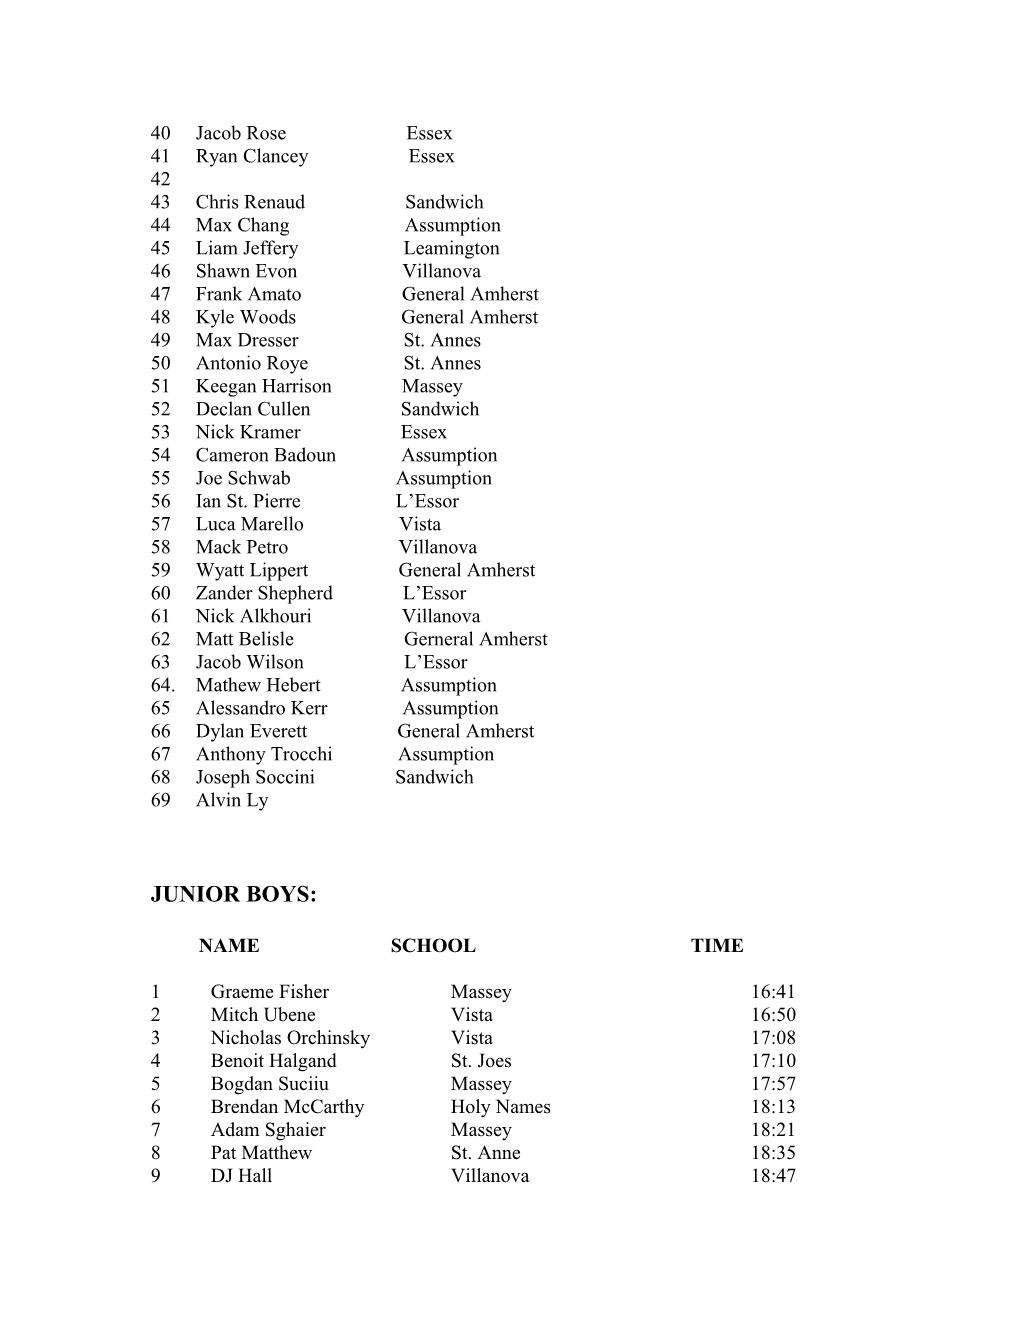 WECSSA X-COUNTRY RAIDER OPEN RESULTS Sept 24, 2013